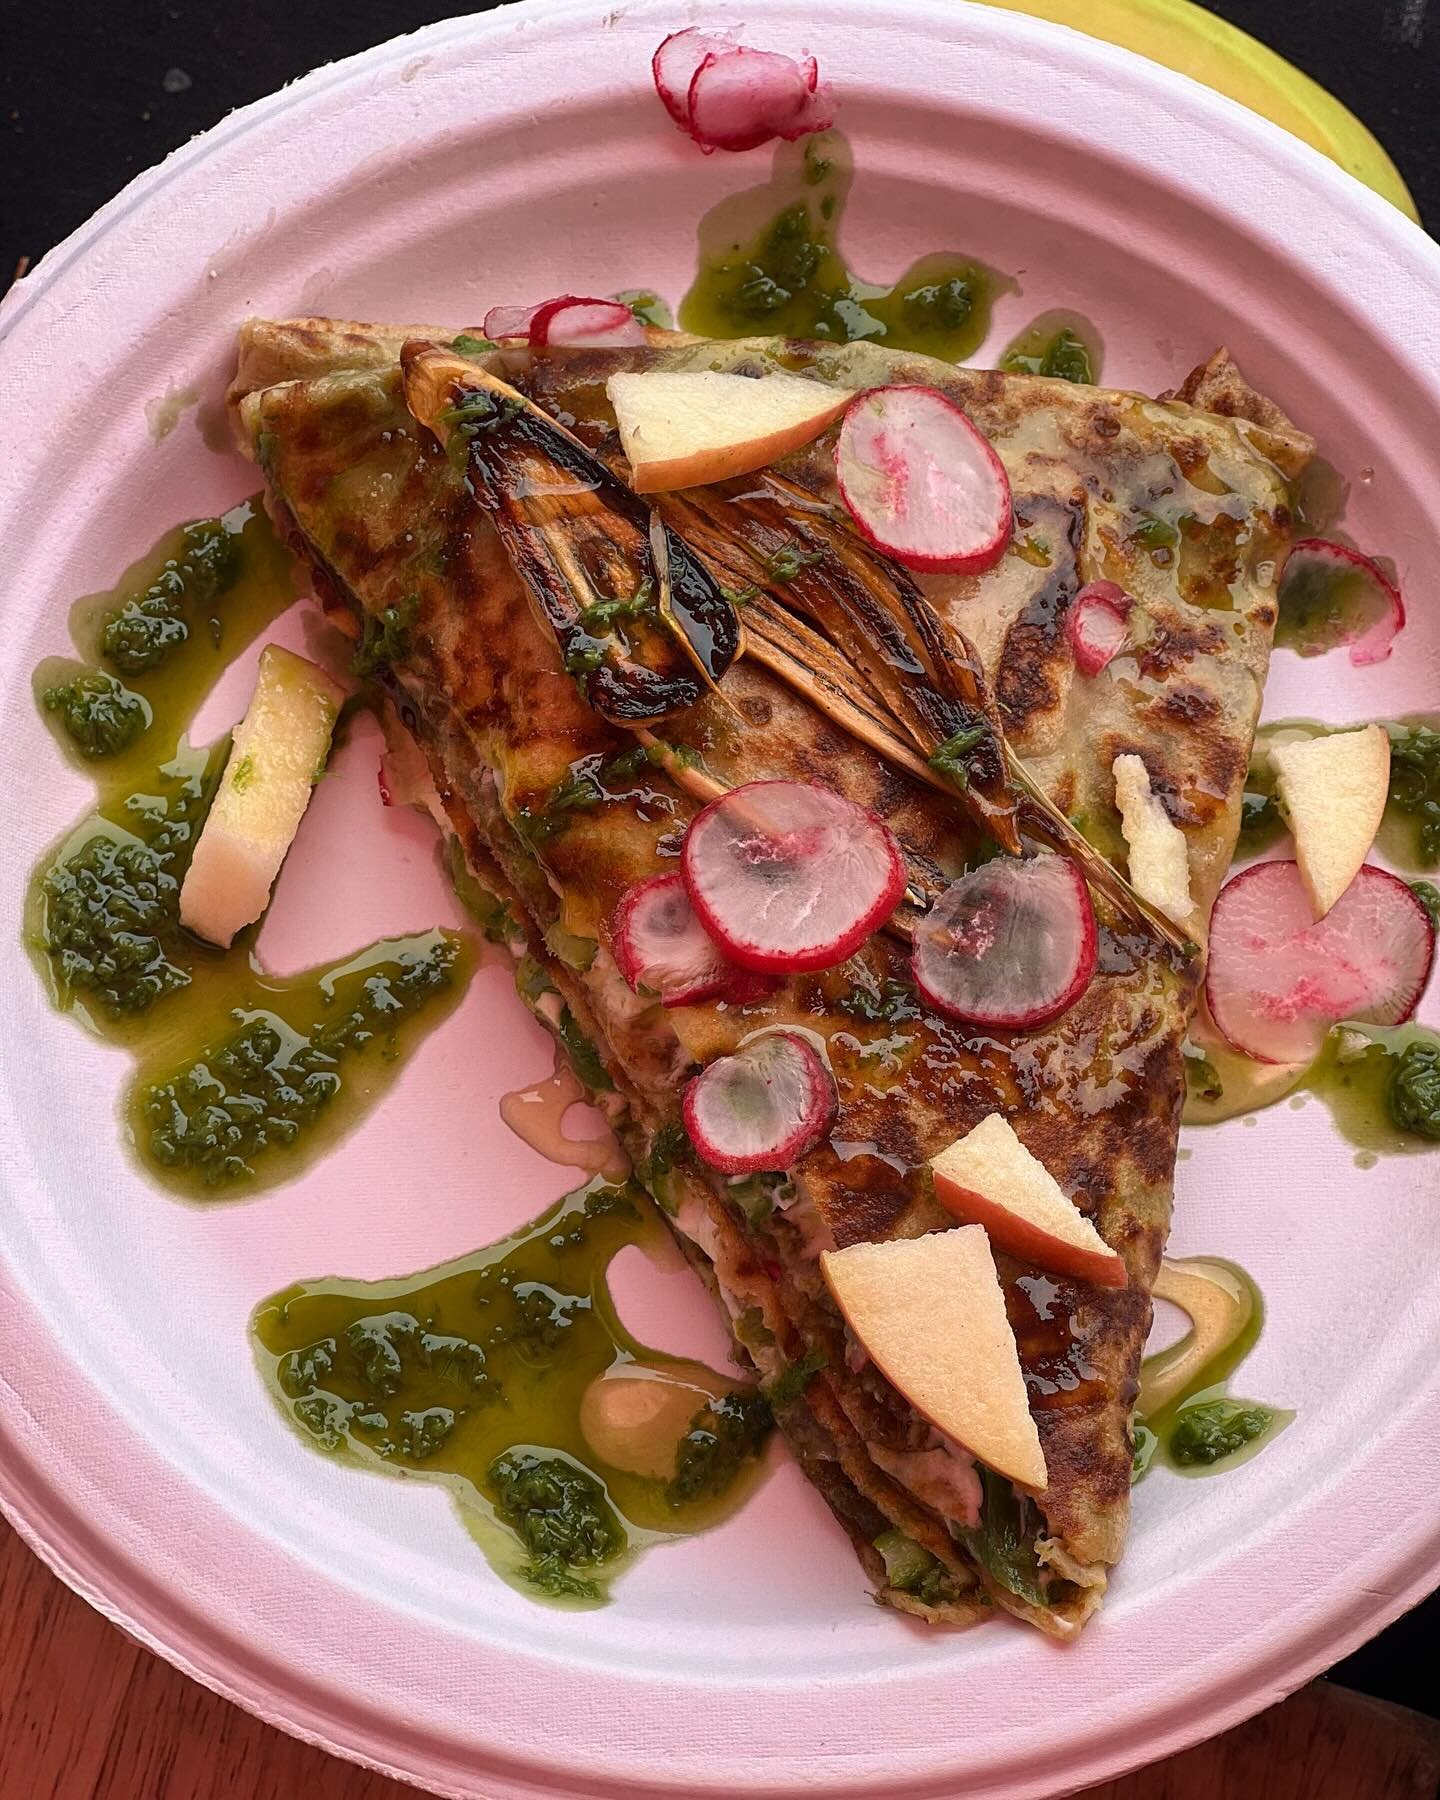 Spring Feast!  This was my first crepe of the season&mdash;so dam delicious&mdash;goat cheese, asparagus, radish, apples, ramp pesto, &amp; honey.  Thanks to Kathia for teaching me the sauces the way it&rsquo;s Gotta B!! @mickklugfarms &amp; @gormanf